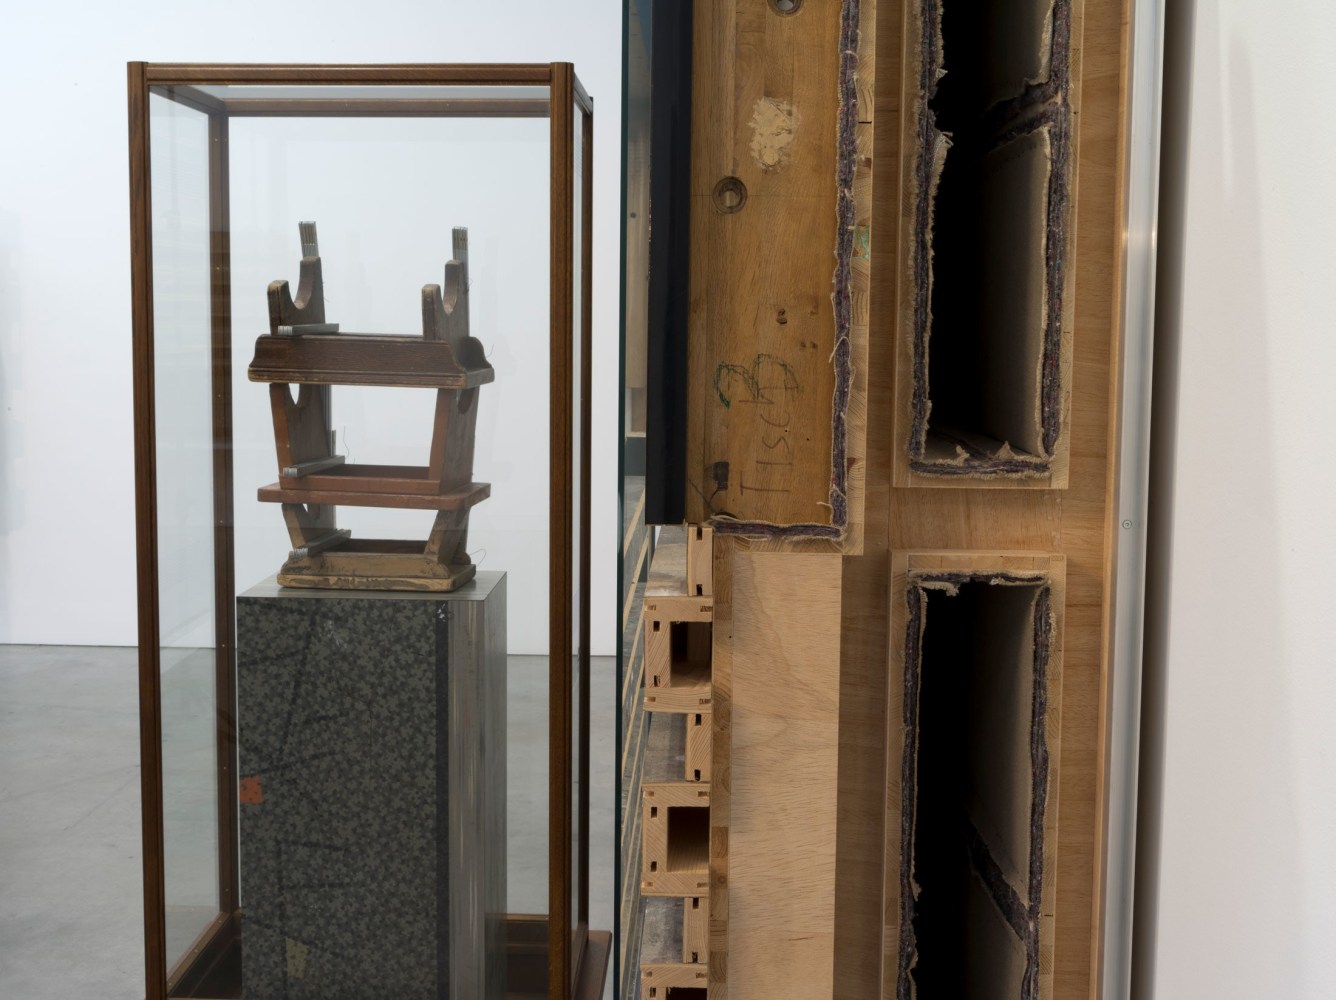 Reinhard Mucha

Freiheit for Berlin&amp;nbsp;/&amp;nbsp;Minden, [2013] 2008 / 2013

Two-part work ensemble

&amp;nbsp;

Free-standing sculpture

Freiheit for Berlin, 2008

Solid wood, float glass (display&amp;nbsp;case), oil paint print on bituminized feltbase (flooring,&amp;nbsp;found&amp;nbsp;material) on blockboard (pedestal), 3 wooden footstools (found&amp;nbsp;objects), 9 aluminum folding rulers, binding wire

71.89 x 30.31 x 20.47 inches

(182.6 x 77.0 x 52.0 cm)

Wall-mounted sculpture

Minden, 2013

Aluminum profiles, float glass, alkyd enamel painted on reverse of glass,&amp;nbsp;carom billiards table&amp;nbsp;wooden rails with so-called diamonds, cushion rubber, billiard cloth (split&amp;nbsp;found&amp;nbsp;object),&amp;nbsp;floor board from an artist&amp;rsquo;s studio&amp;nbsp;residue of various oil paints, resin and dispersion paints, plywood (split&amp;nbsp;found&amp;nbsp;object), canvas, felt, plywood, blockboard

66.85 x 166.14 x 19.61 inches

(169.8 x 422.0 x 49.8 cm)